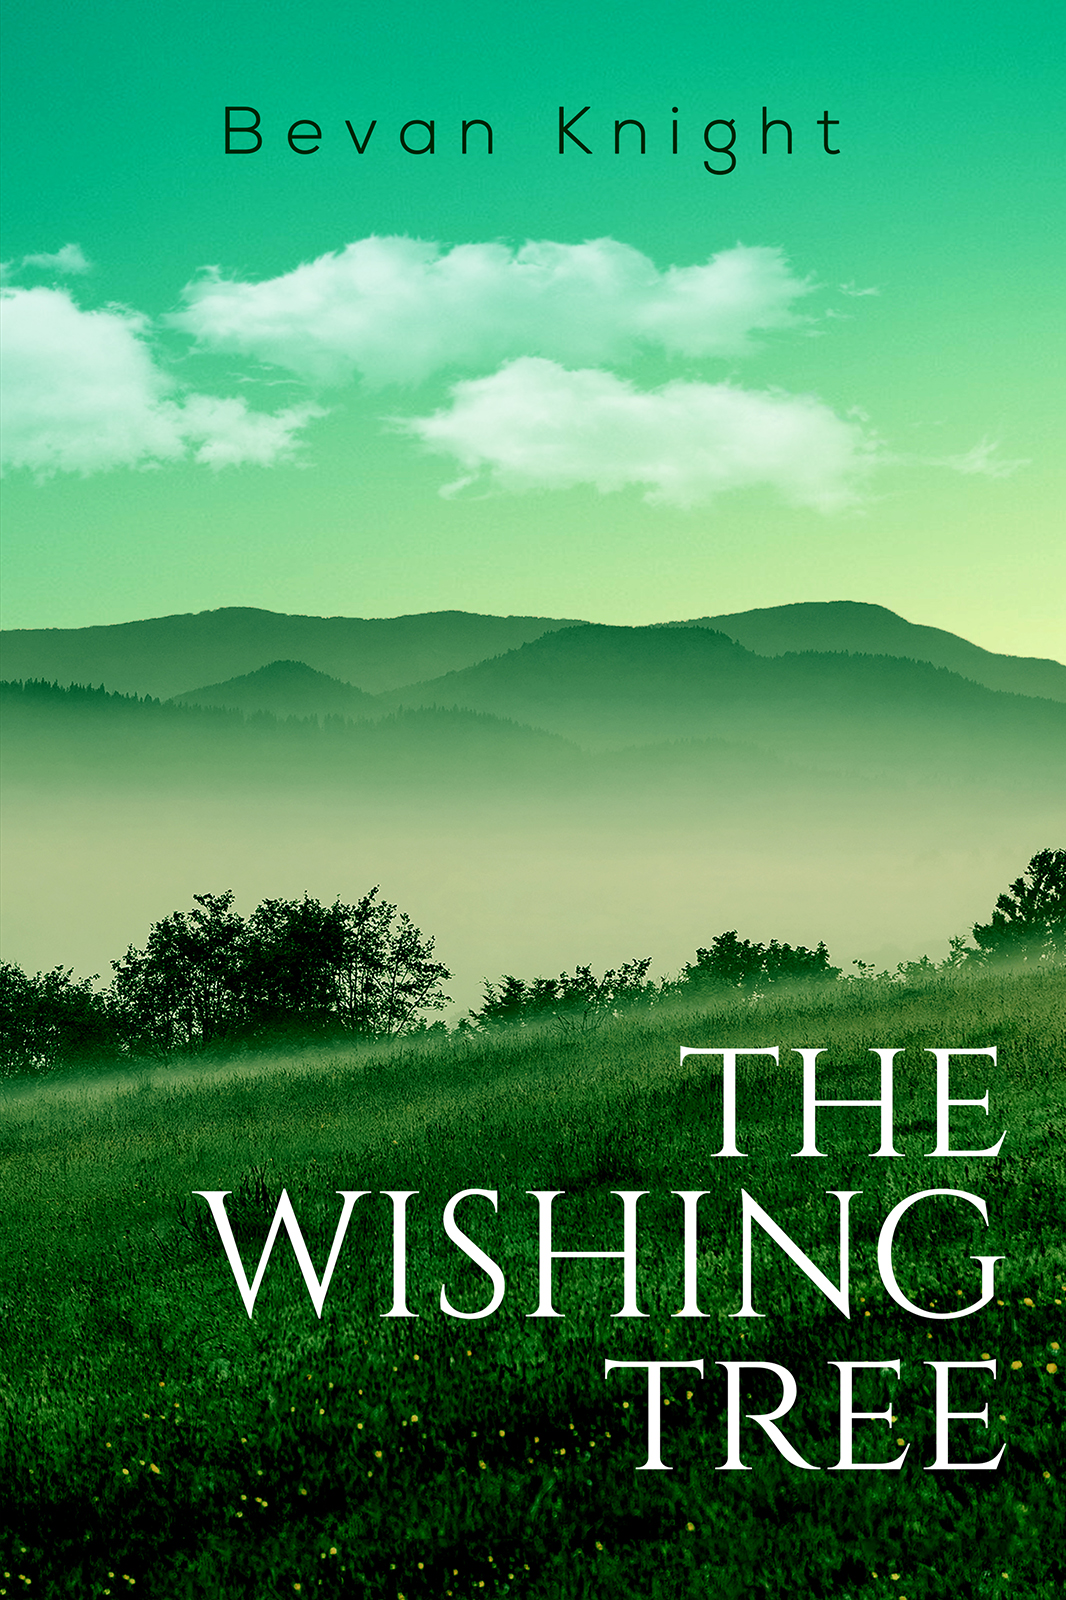 This image is the cover for the book The Wishing Tree